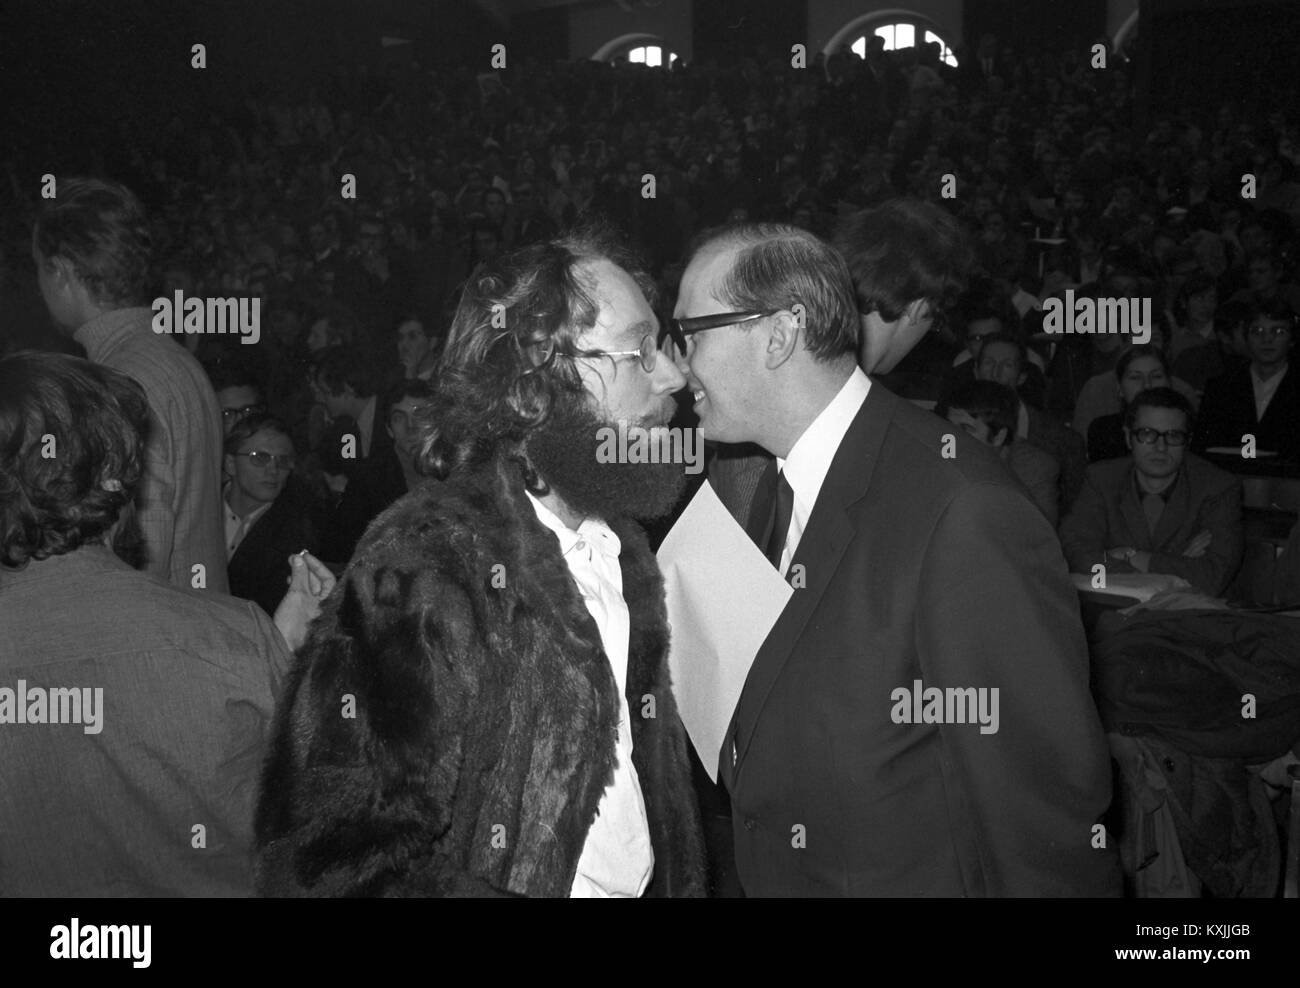 The communard Fritz Teufel (l) and lawyer Horst Mahler (r) in the overcrowded lecture hall of Munich University during a Teach-In on 08 November 1968. | usage worldwide Stock Photo